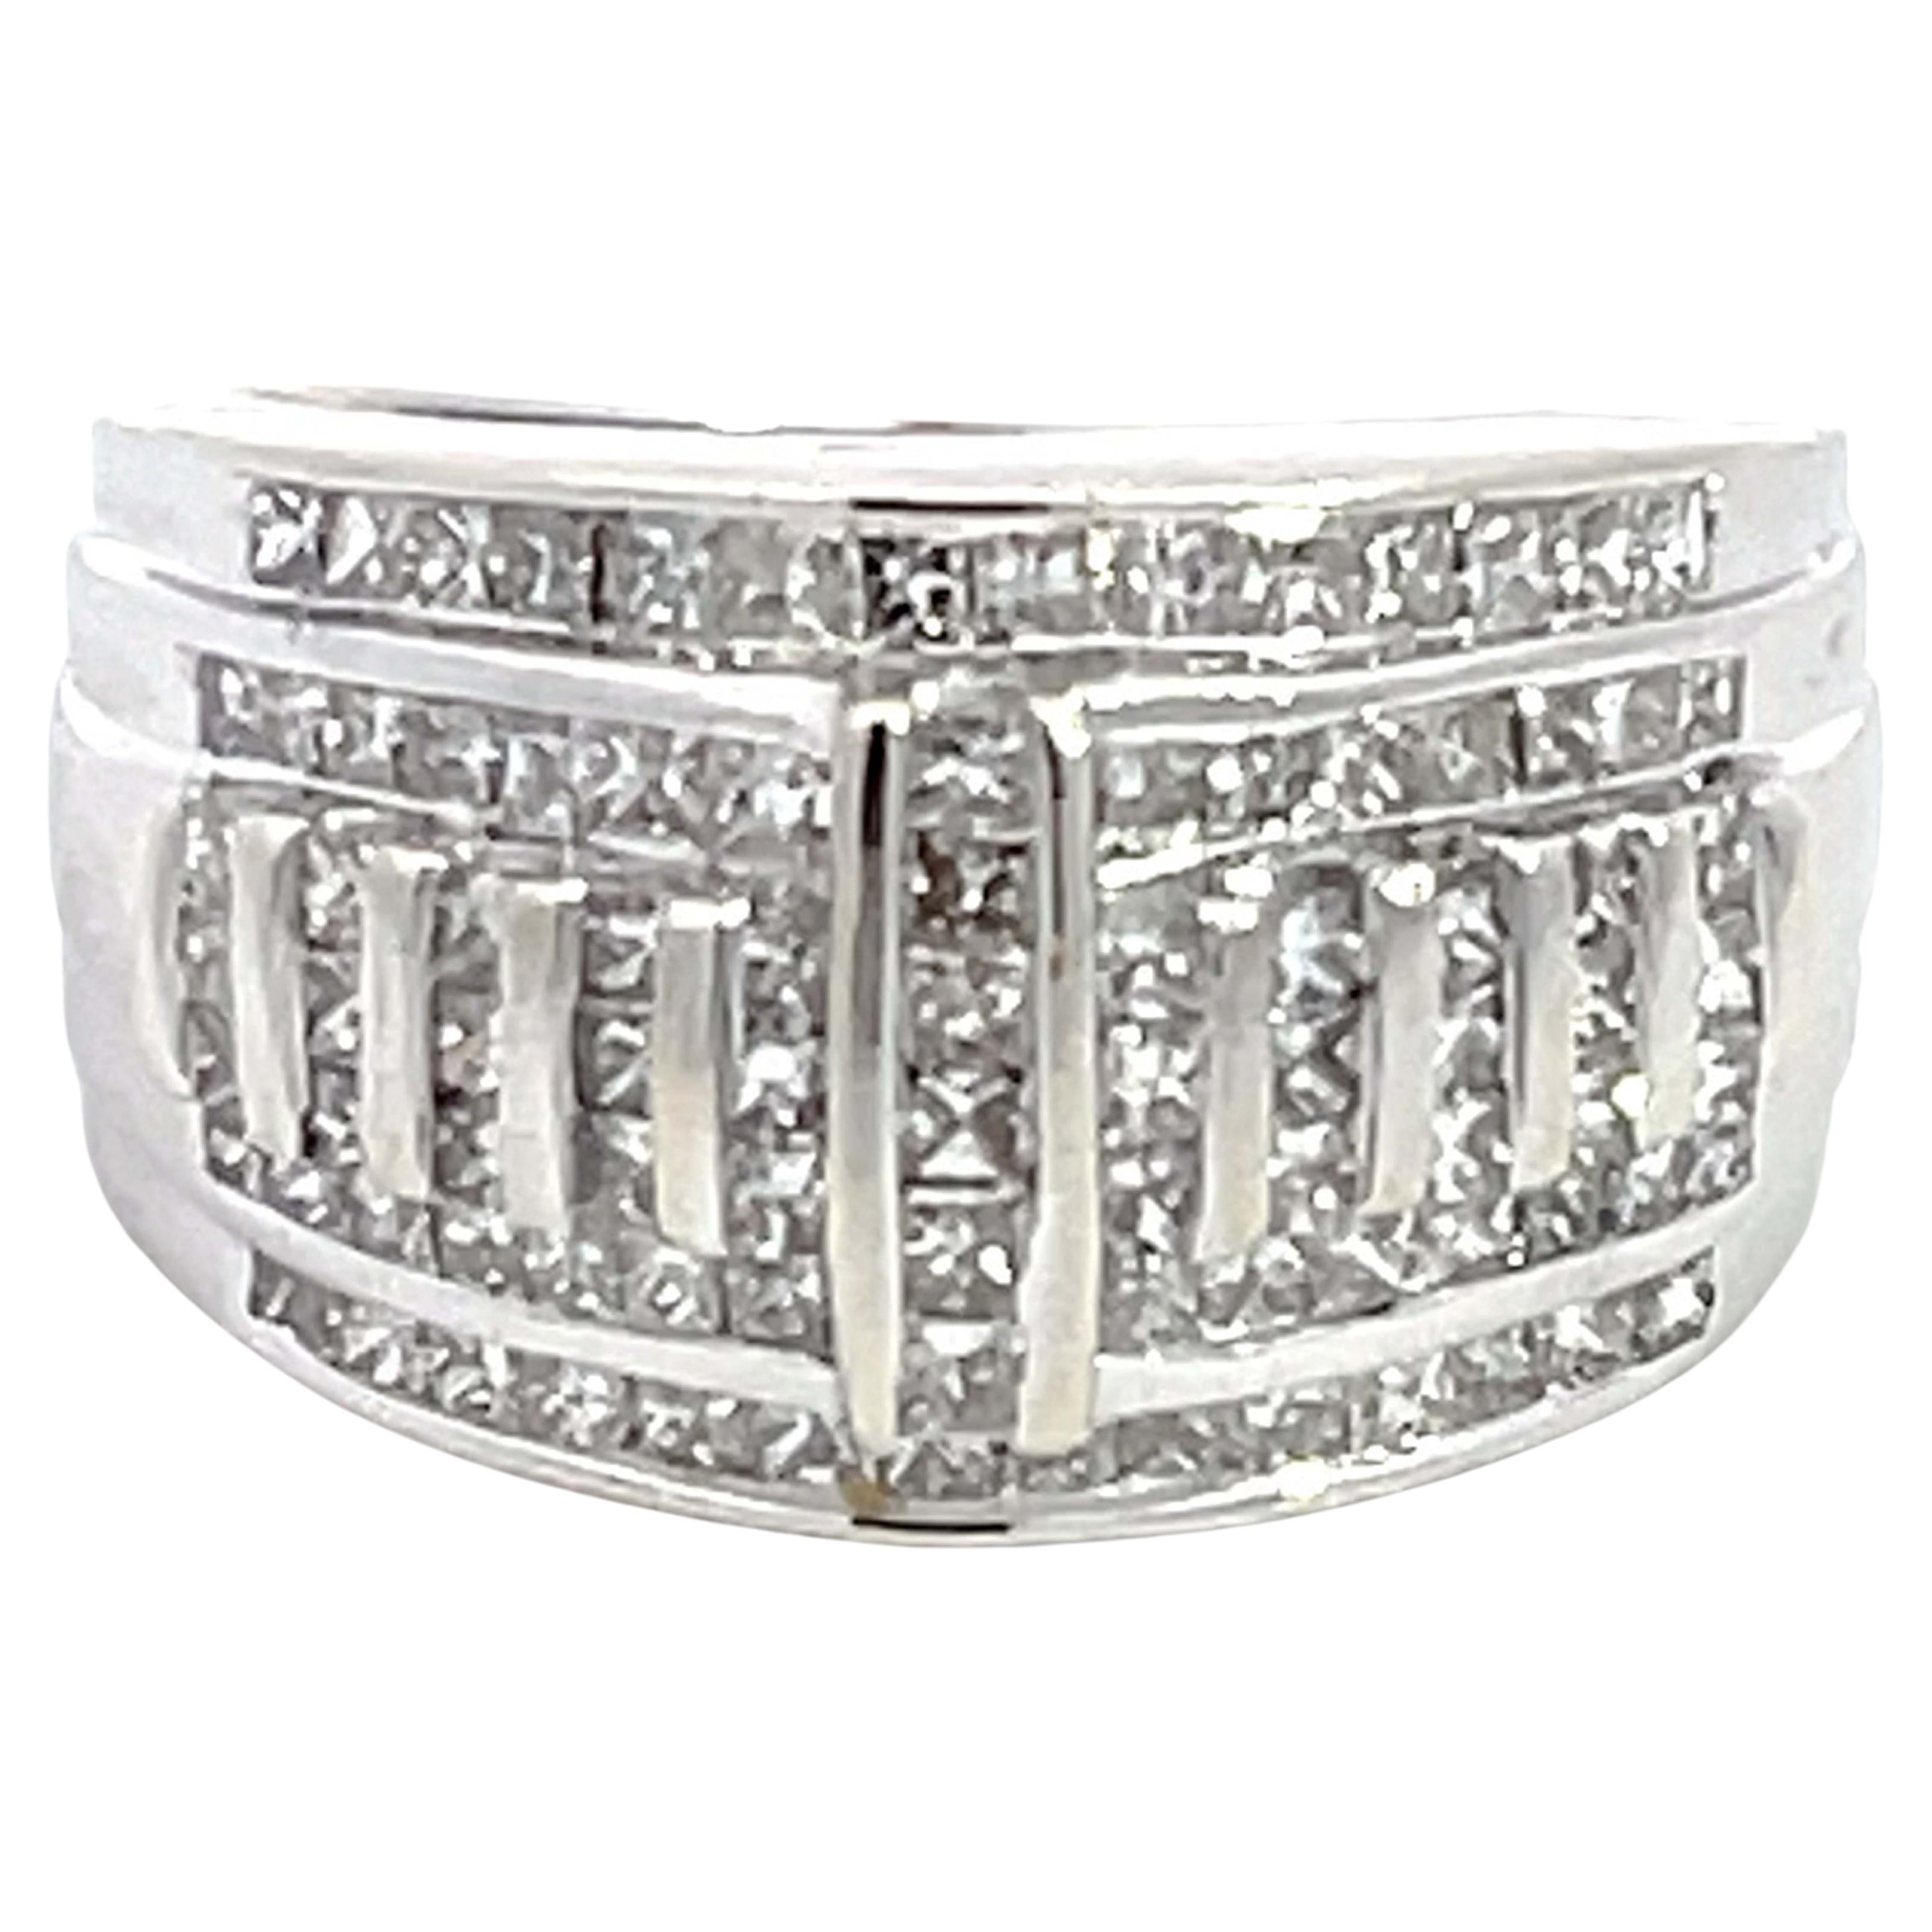 2.00 Carat Princess Cut Diamond Dome Band Ring in 14k White Gold For Sale